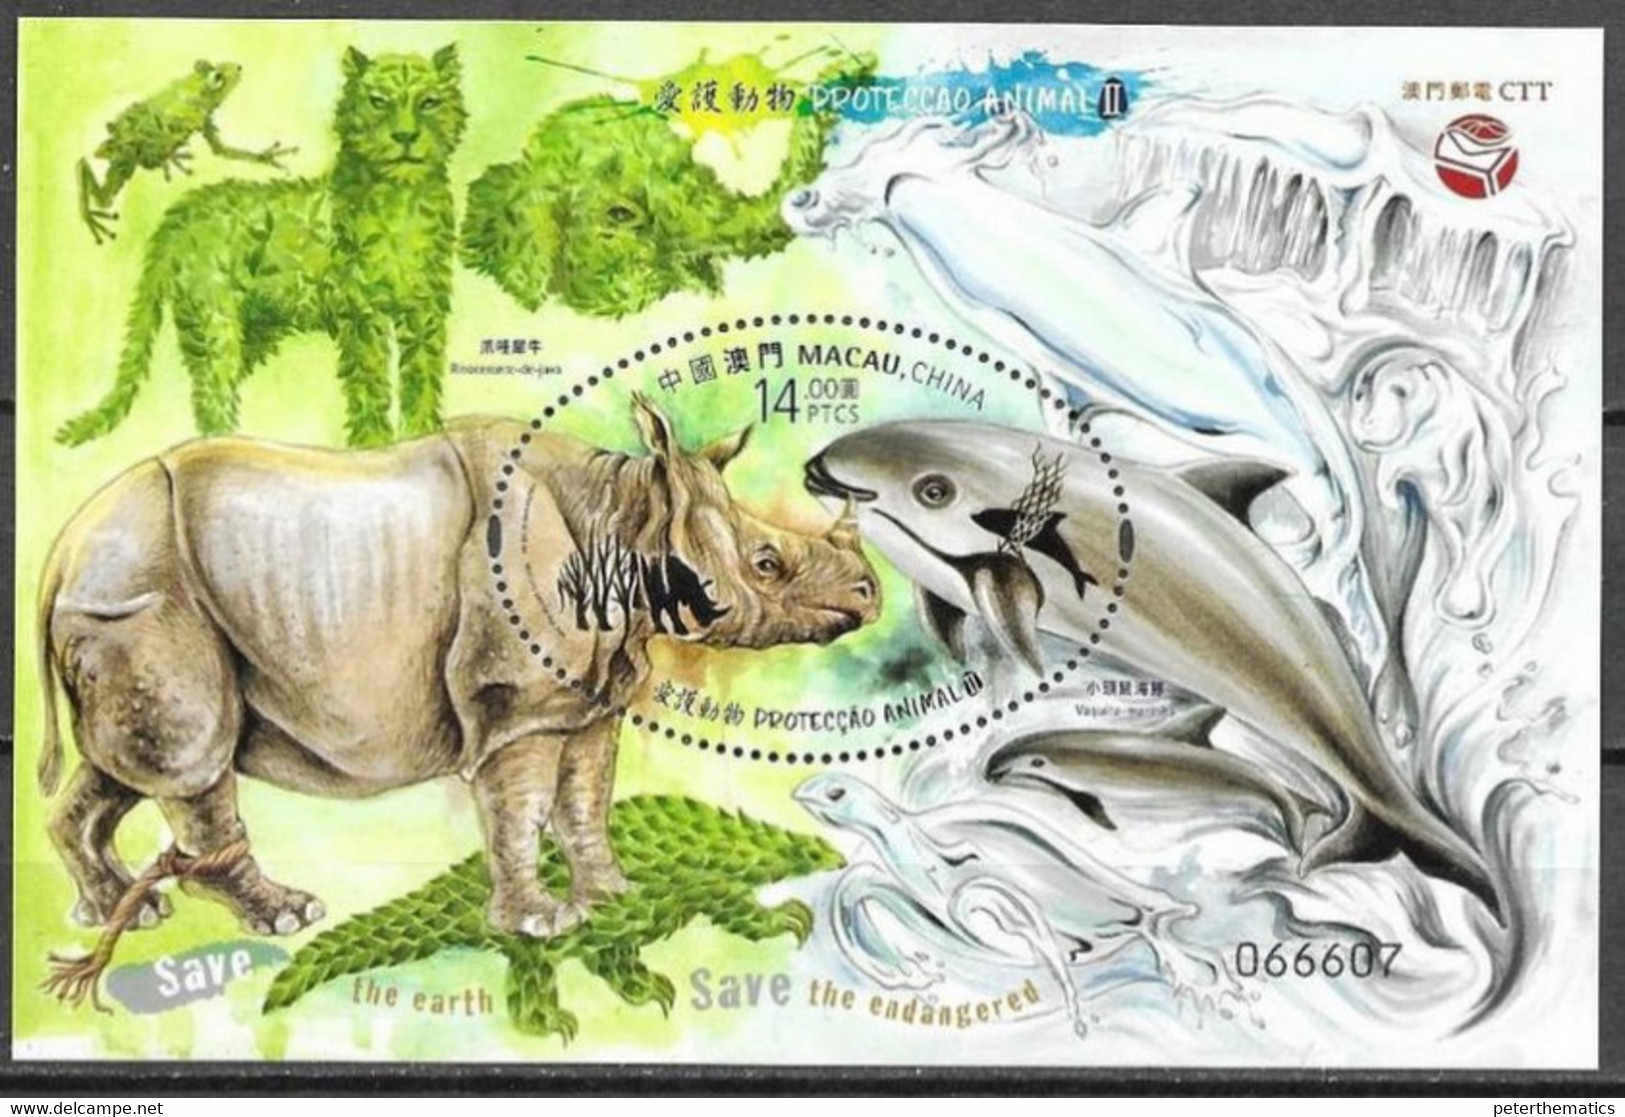 MACAO, 2020, MNH, ENDANGERED ANIMALS, DOLPHINS, TURTLES, FELINES, RHINOS, SHARKS, S/SHEET - Dolphins